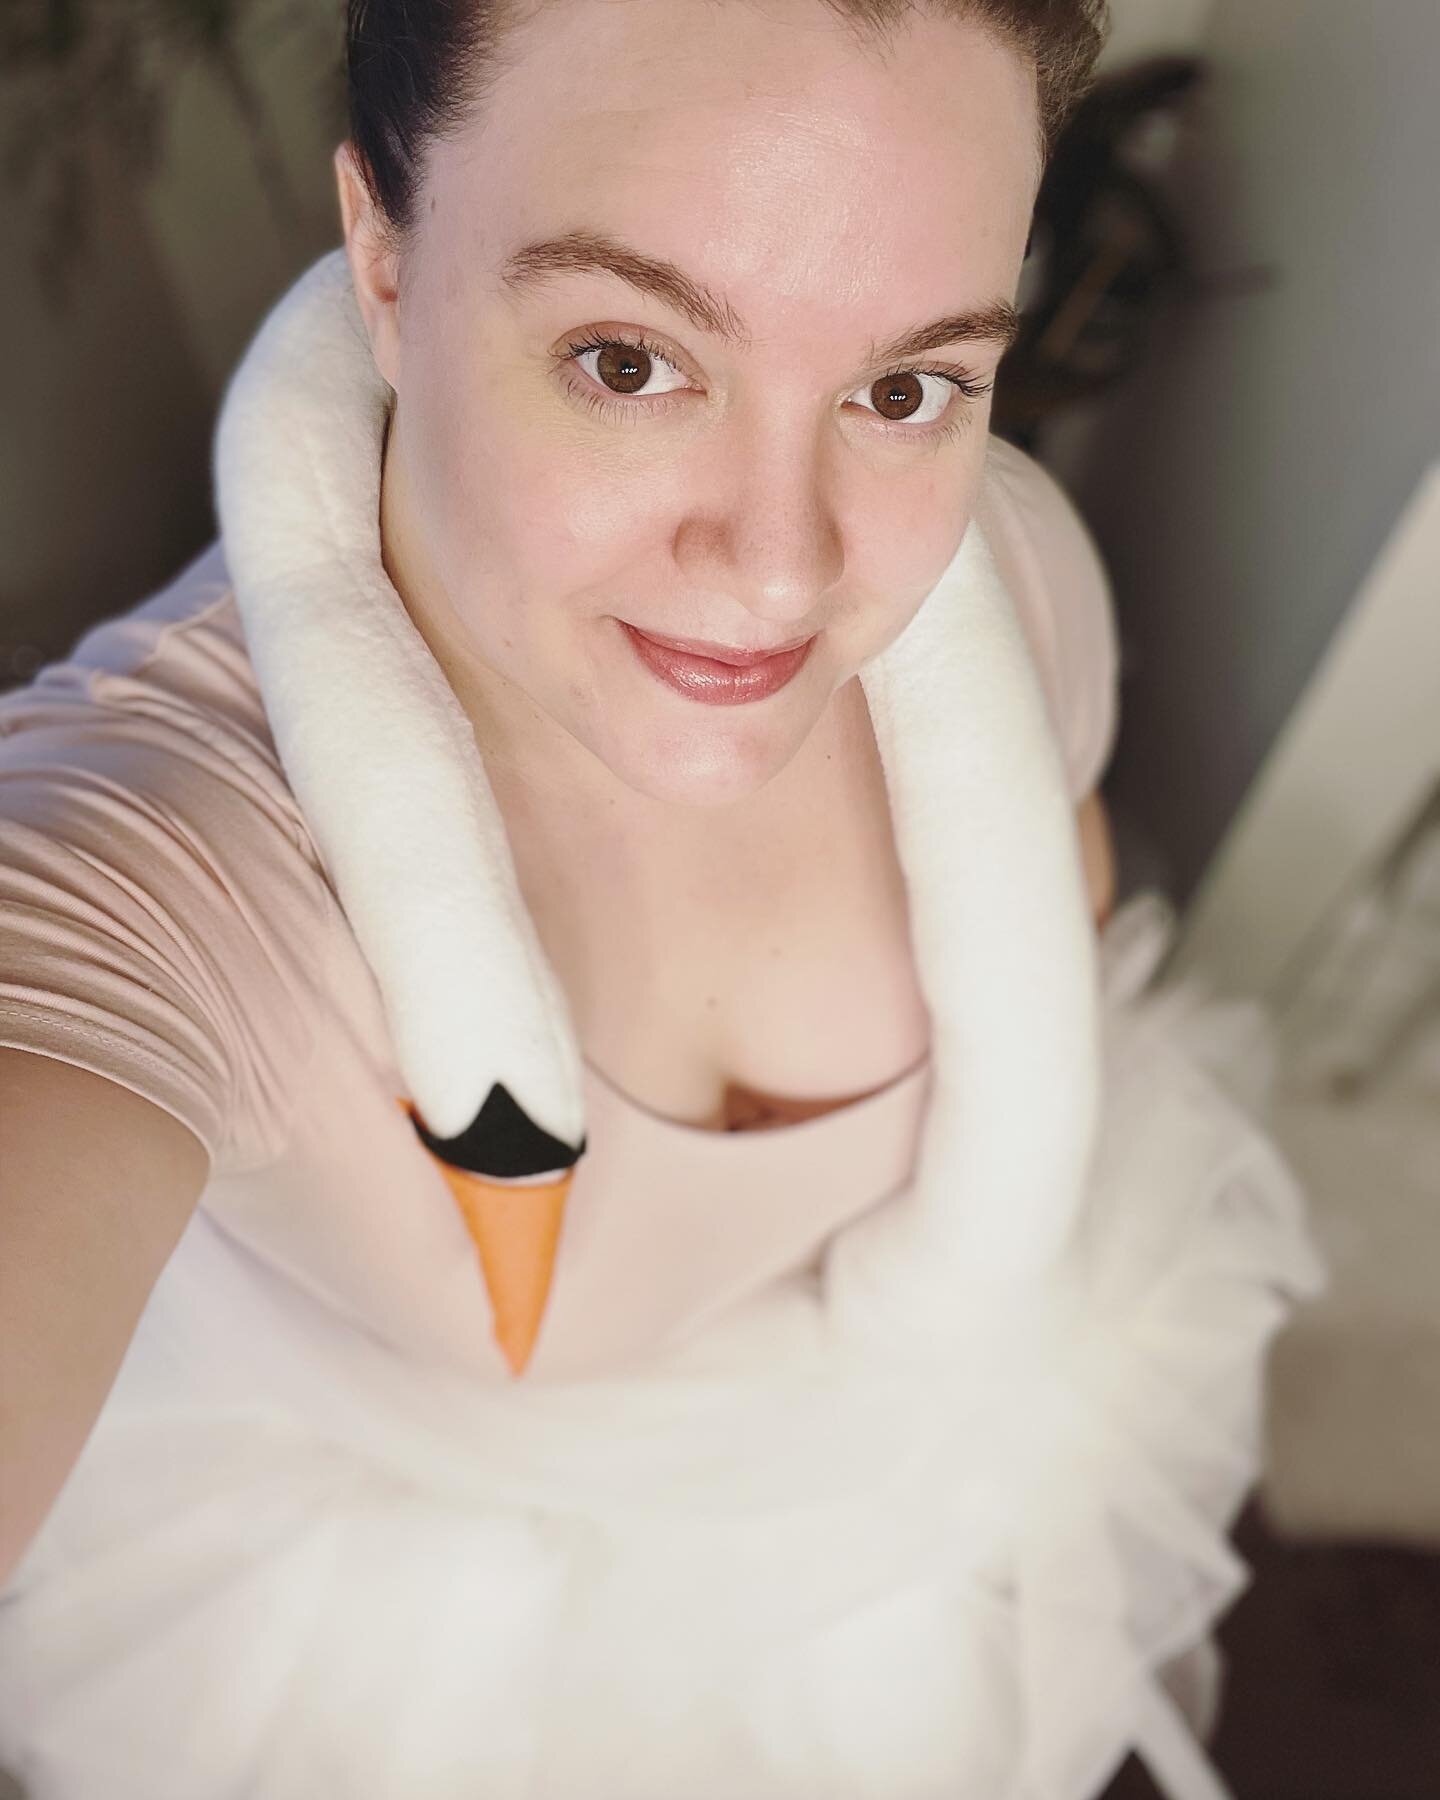 It&rsquo;s always fun to dress up in handmade costumes!  It&rsquo;s also fun to work some place where handmade costumes are appreciated! 
.
This dress is a slice of history!  Bjork&rsquo;s memorable swan dress from the 2001 Academy Awards!  This was 